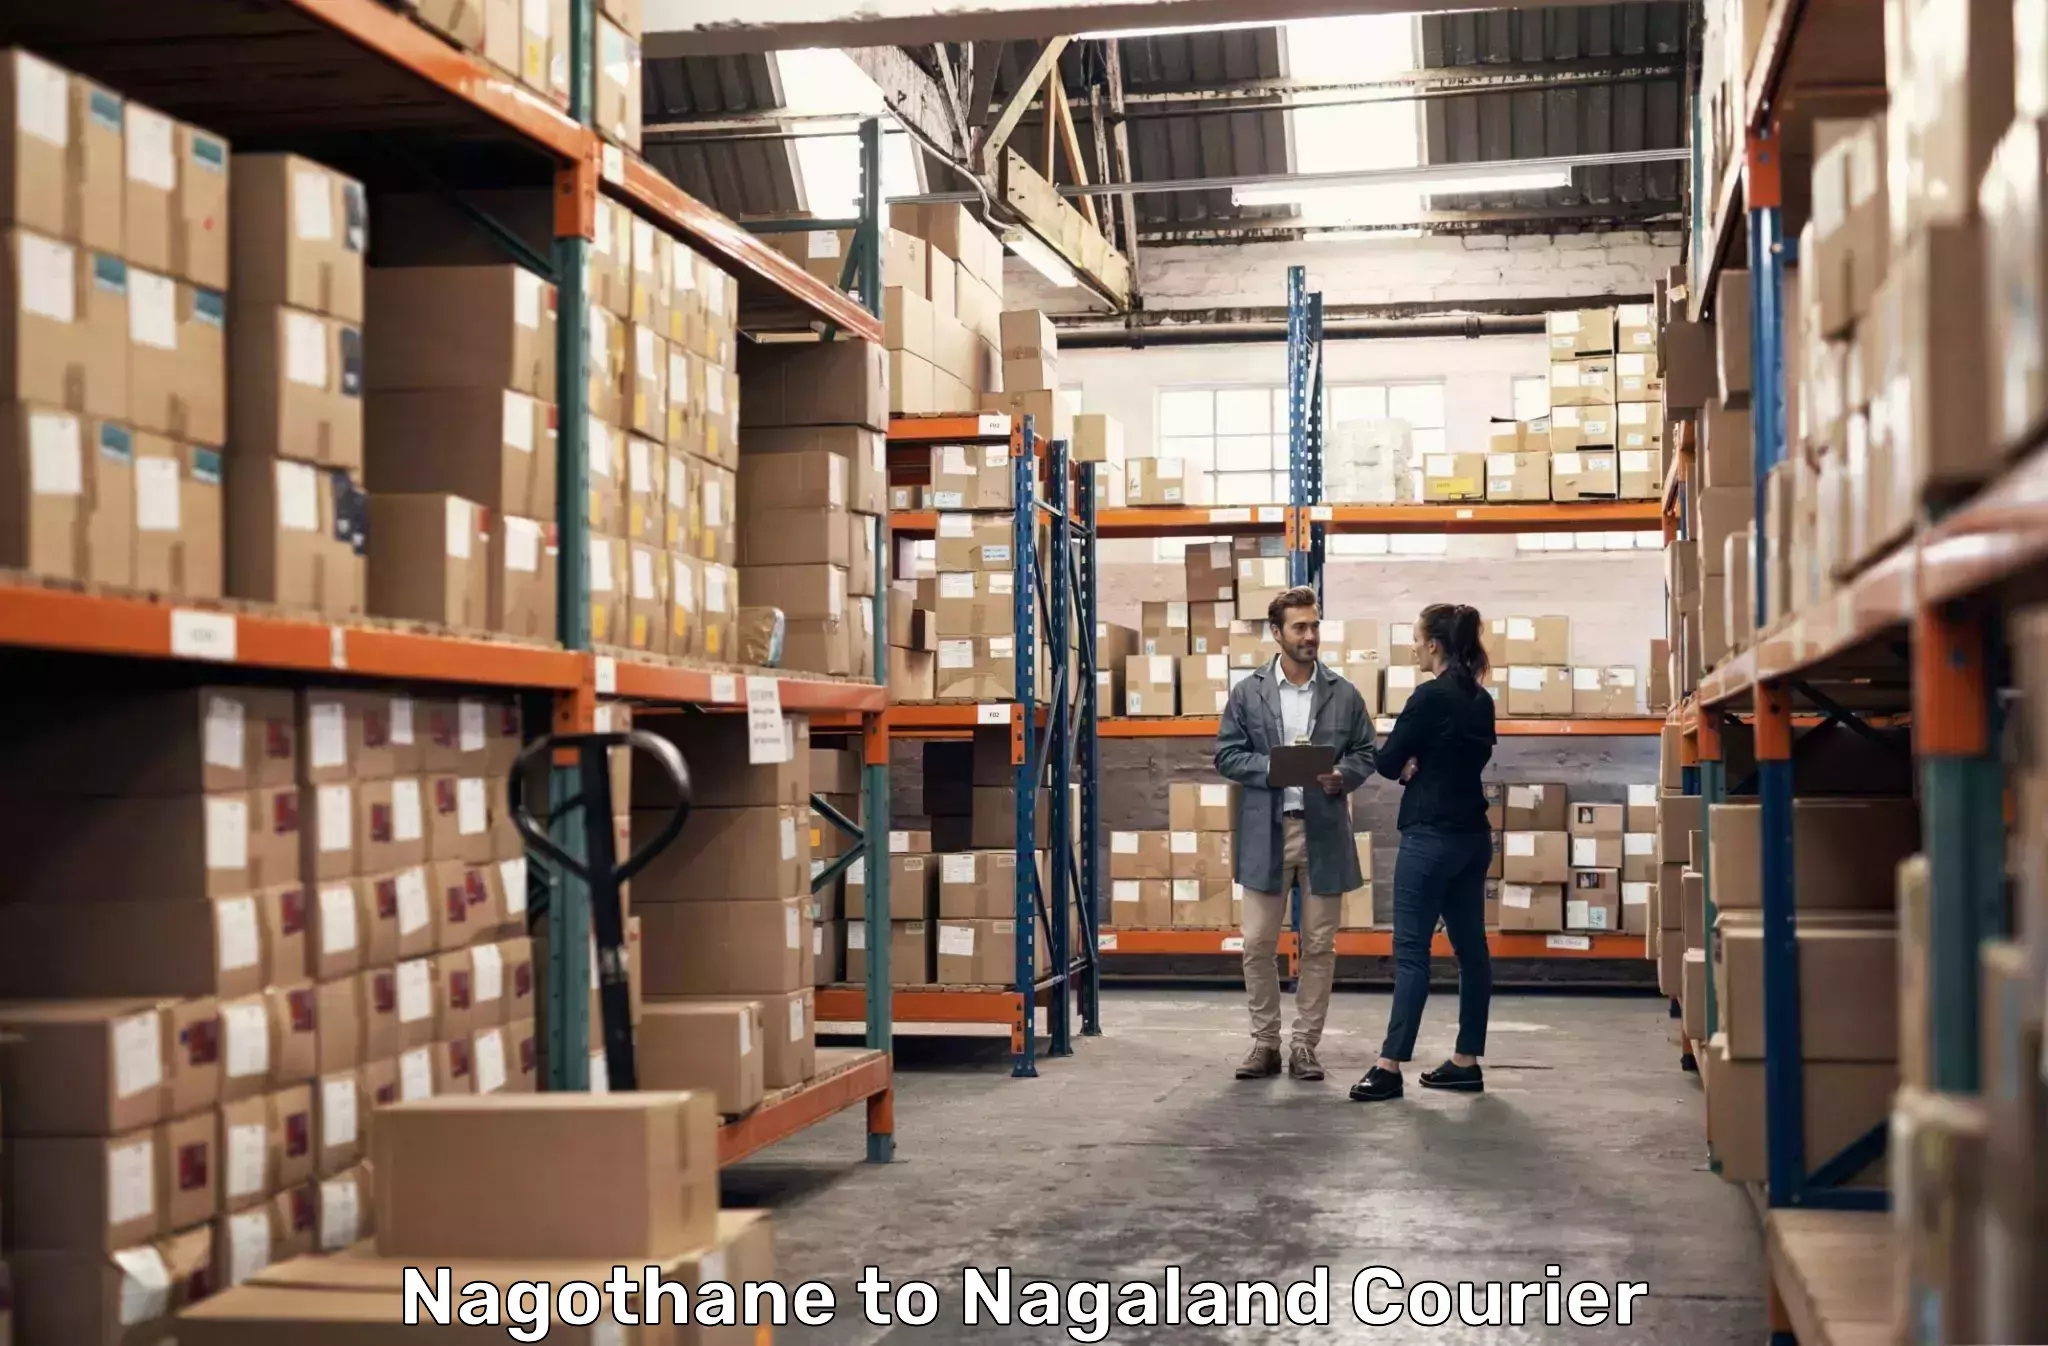 Advanced package delivery Nagothane to Nagaland